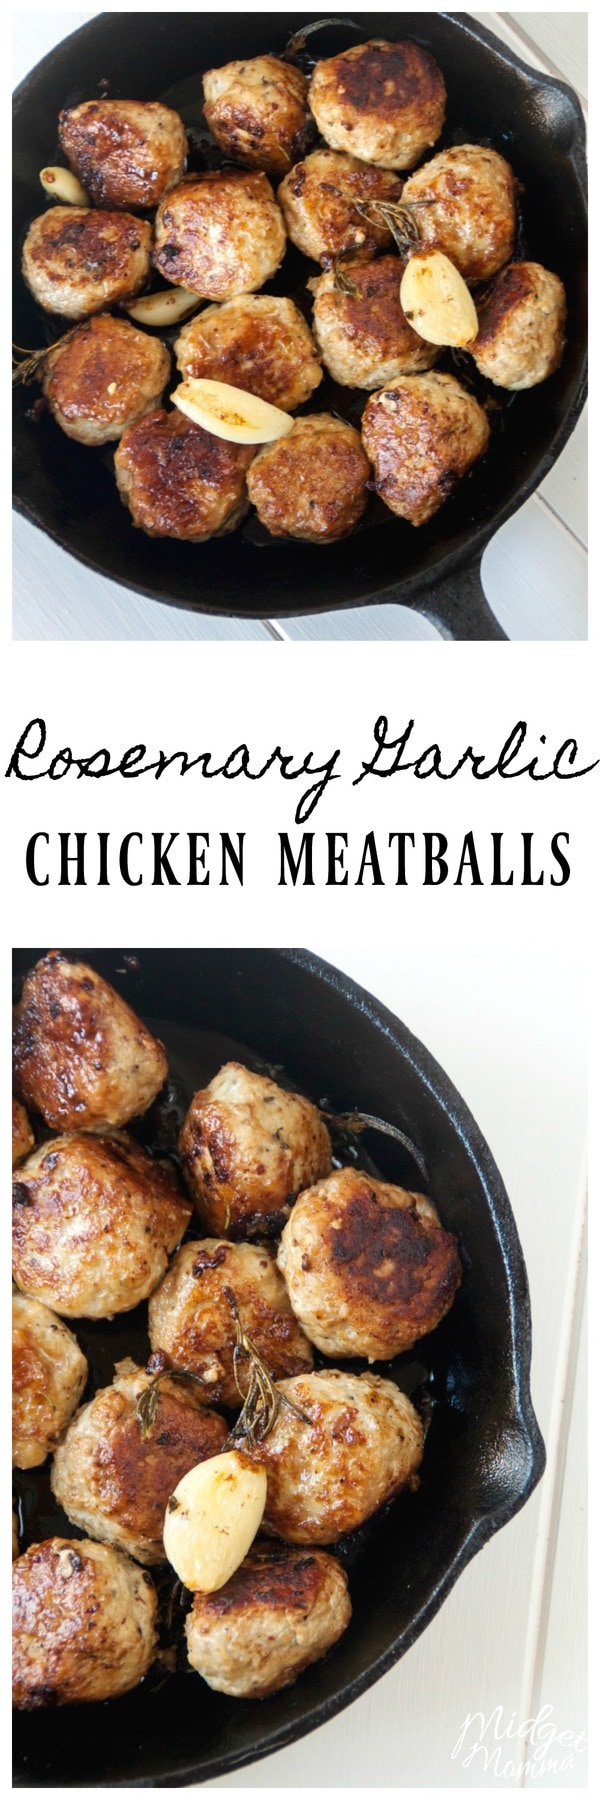 An amazing chicken meatballs recipe - made with ground chicken, garlic and rosemary!Quick and easy to make for dinner! #Chicken #Dinner #recipe #EasyRecipe #ChickenRecipe 